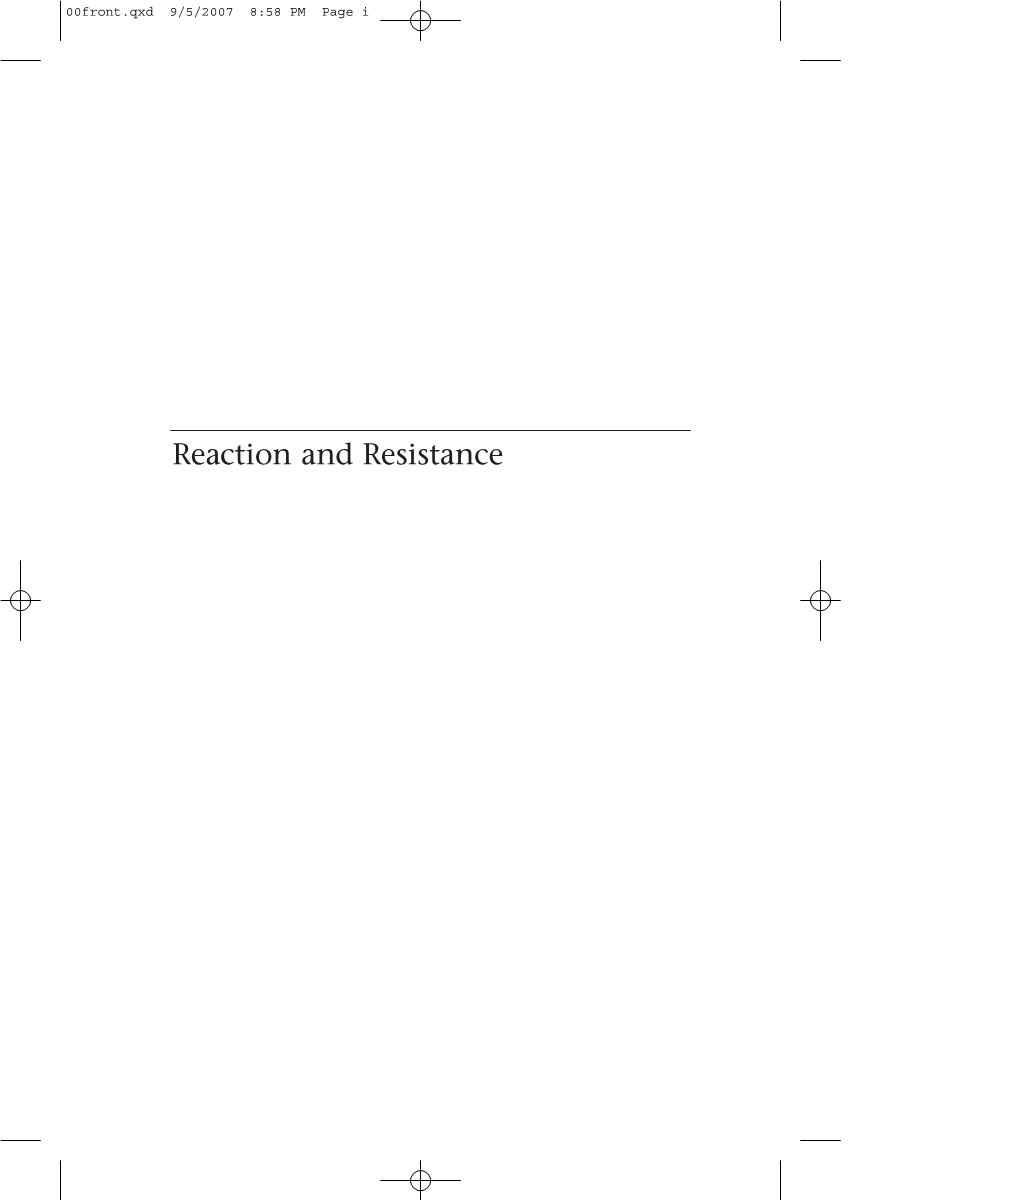 Reaction and Resistance 00Front.Qxd 9/5/2007 8:58 PM Page Ii